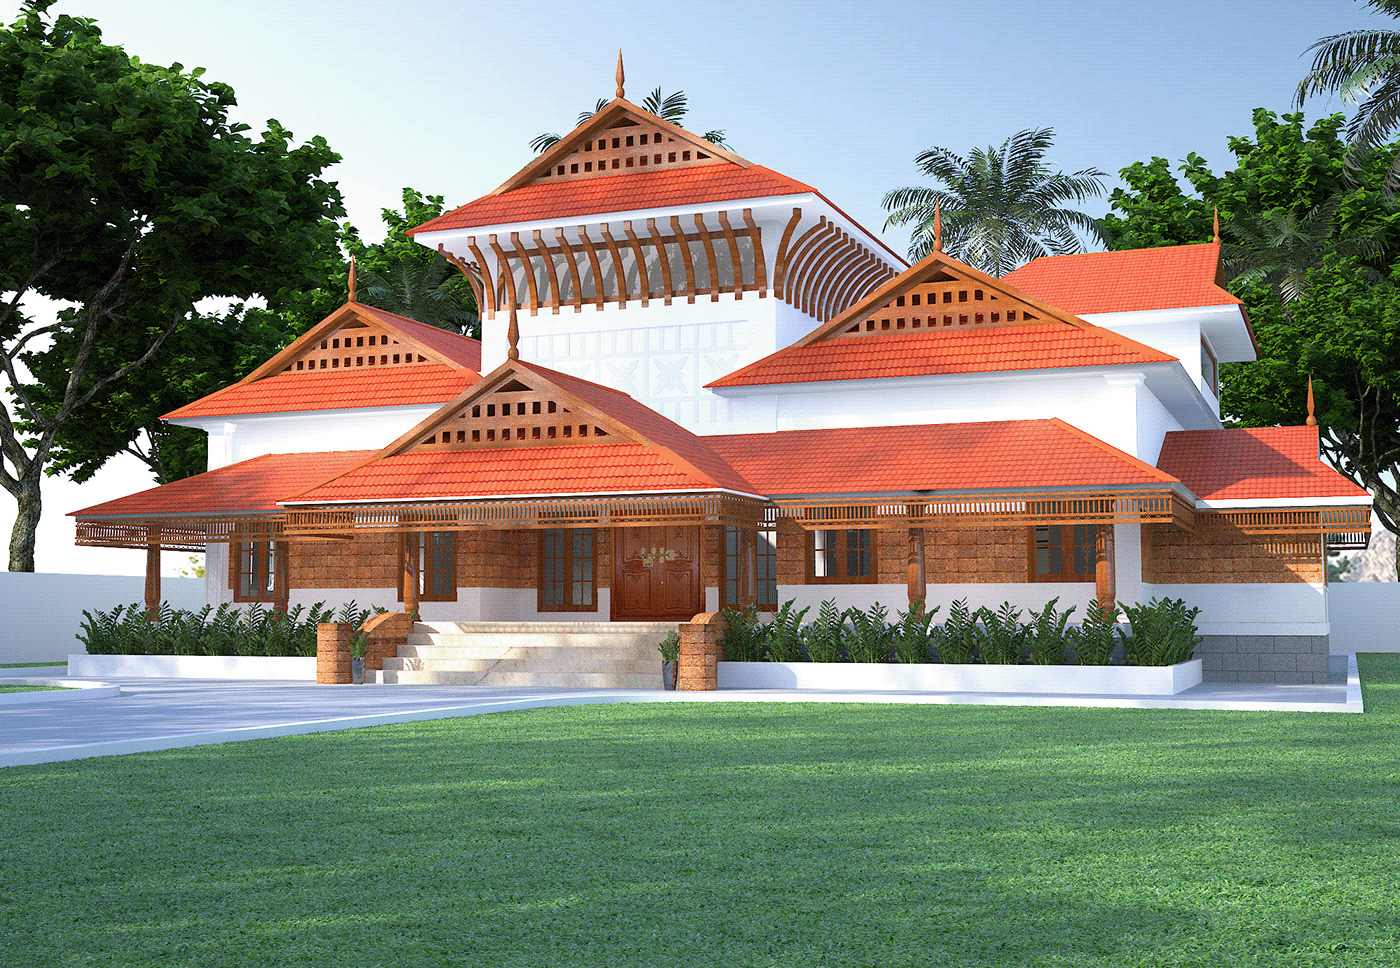 home designing front, kerala style building elevation design, wooden accents, grass around